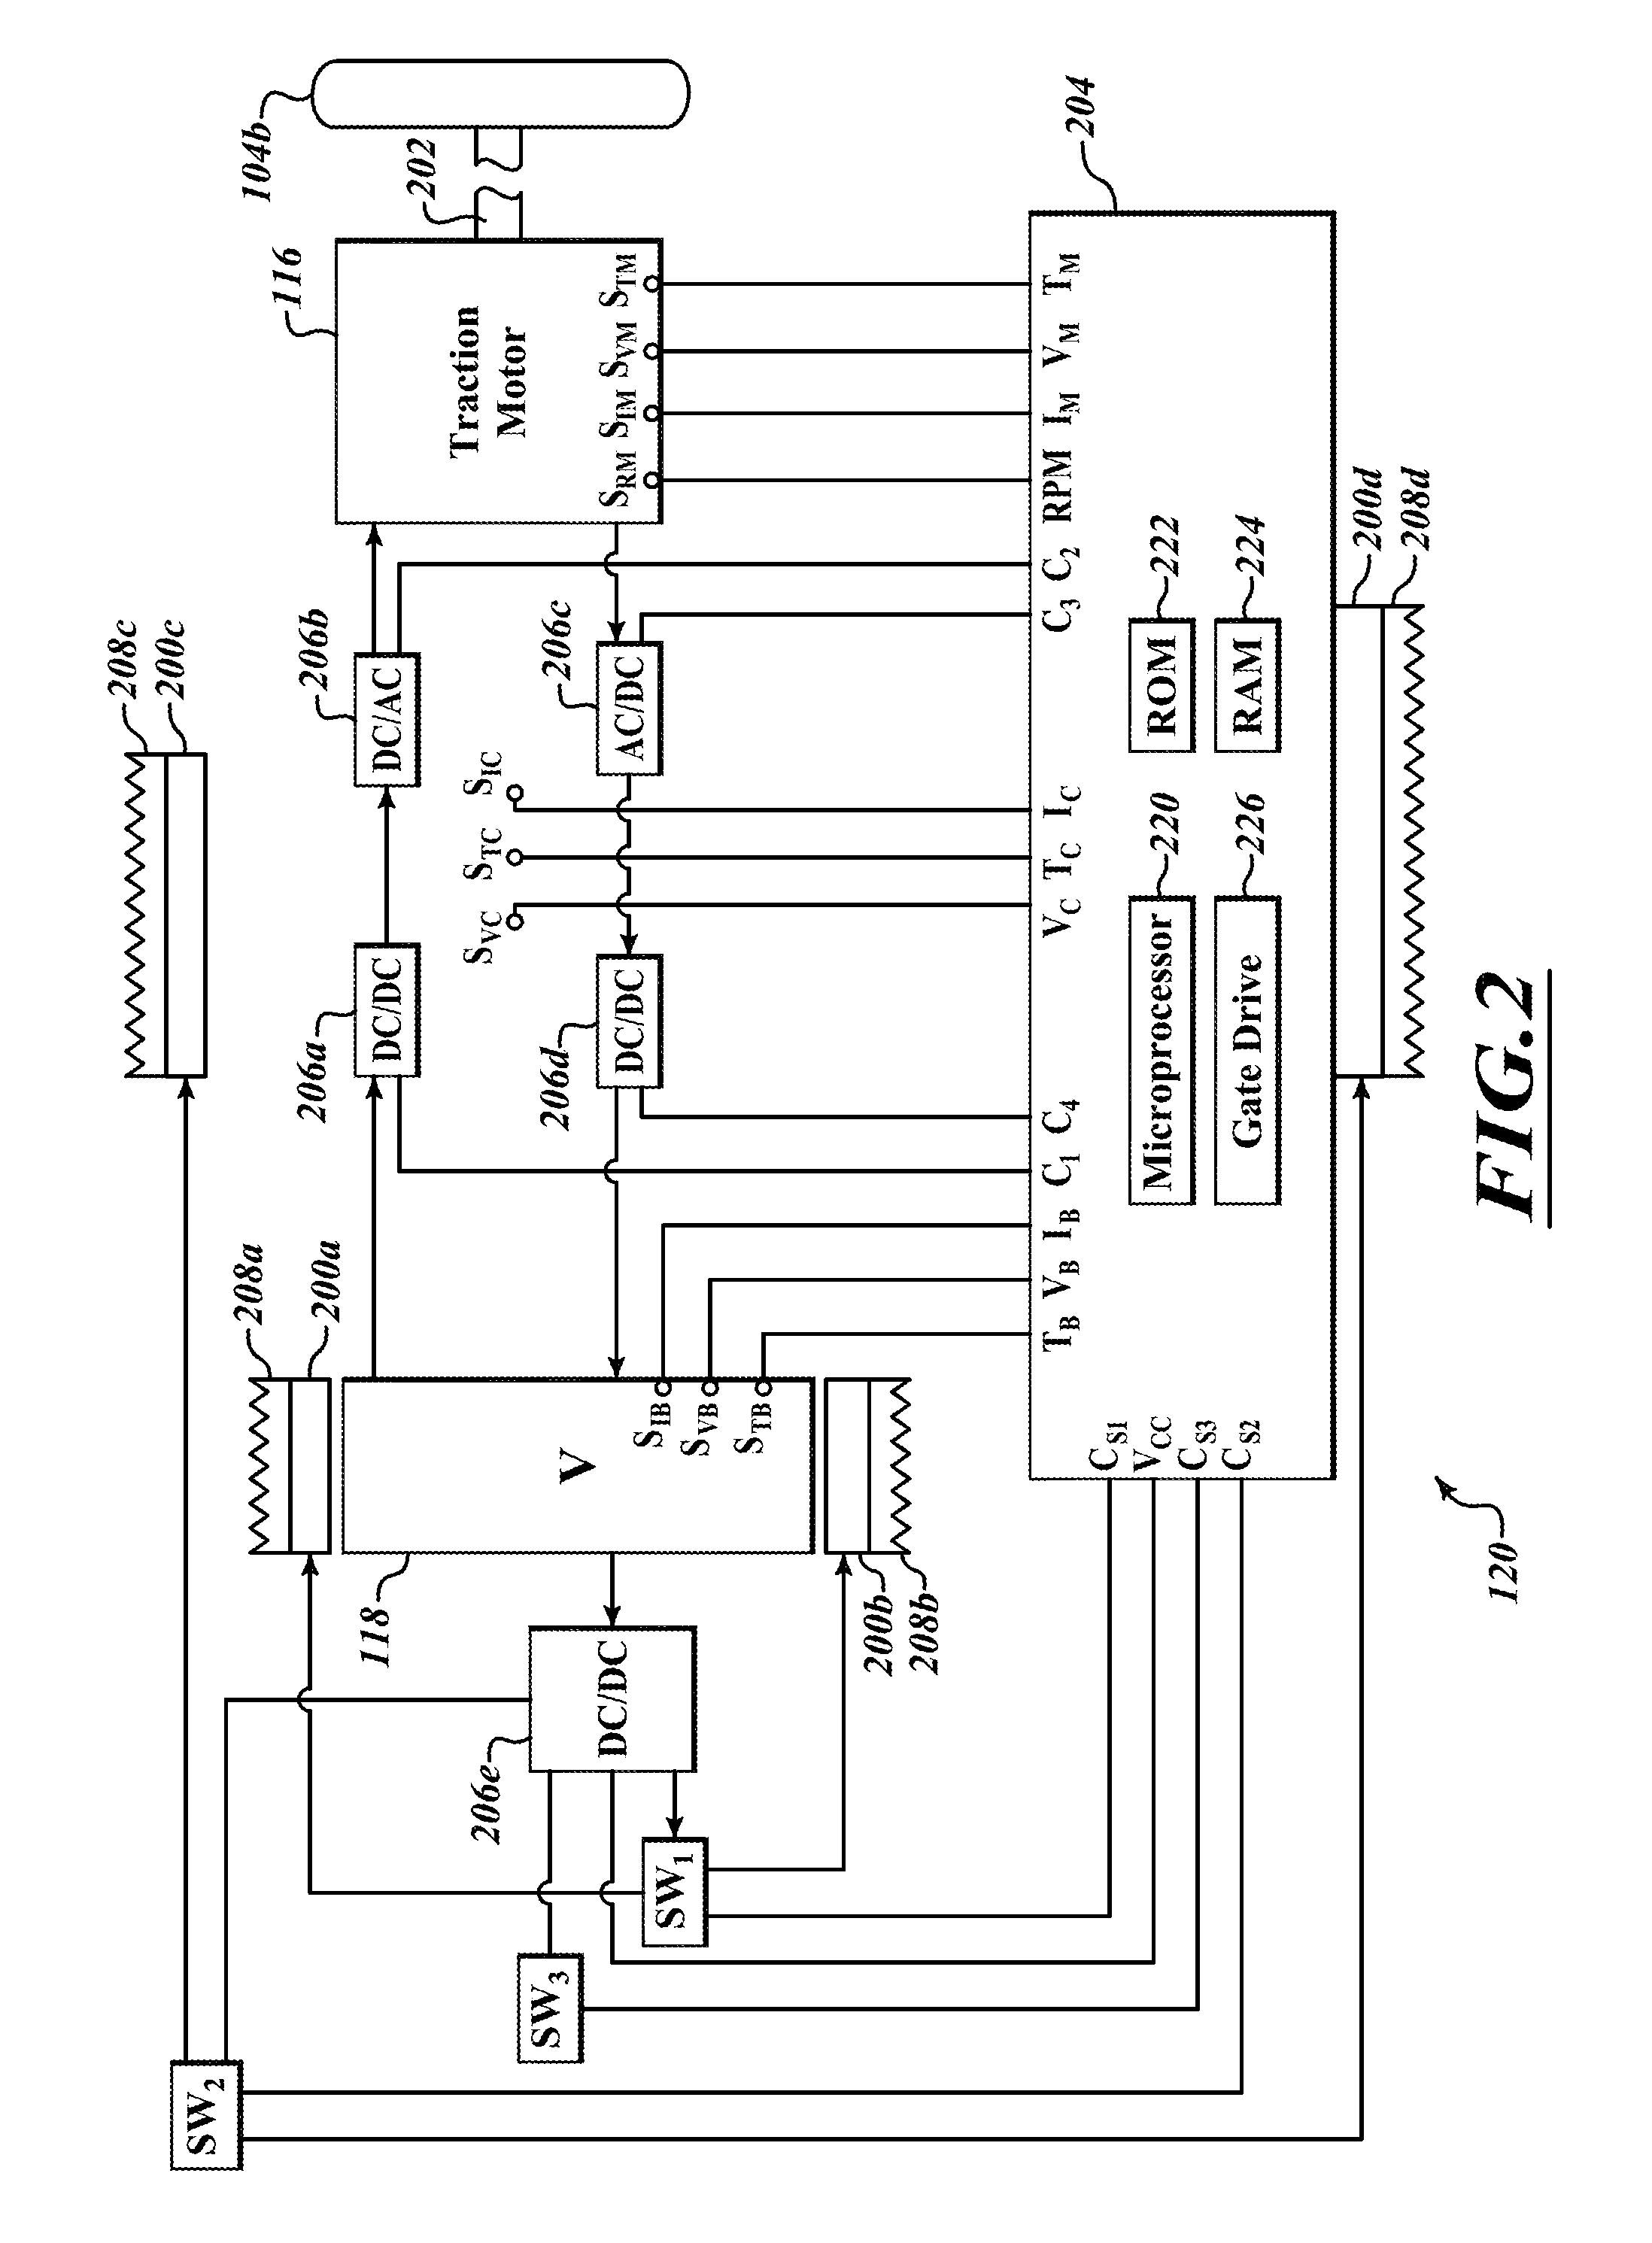 Thermal management of components in electric motor drive vehicles